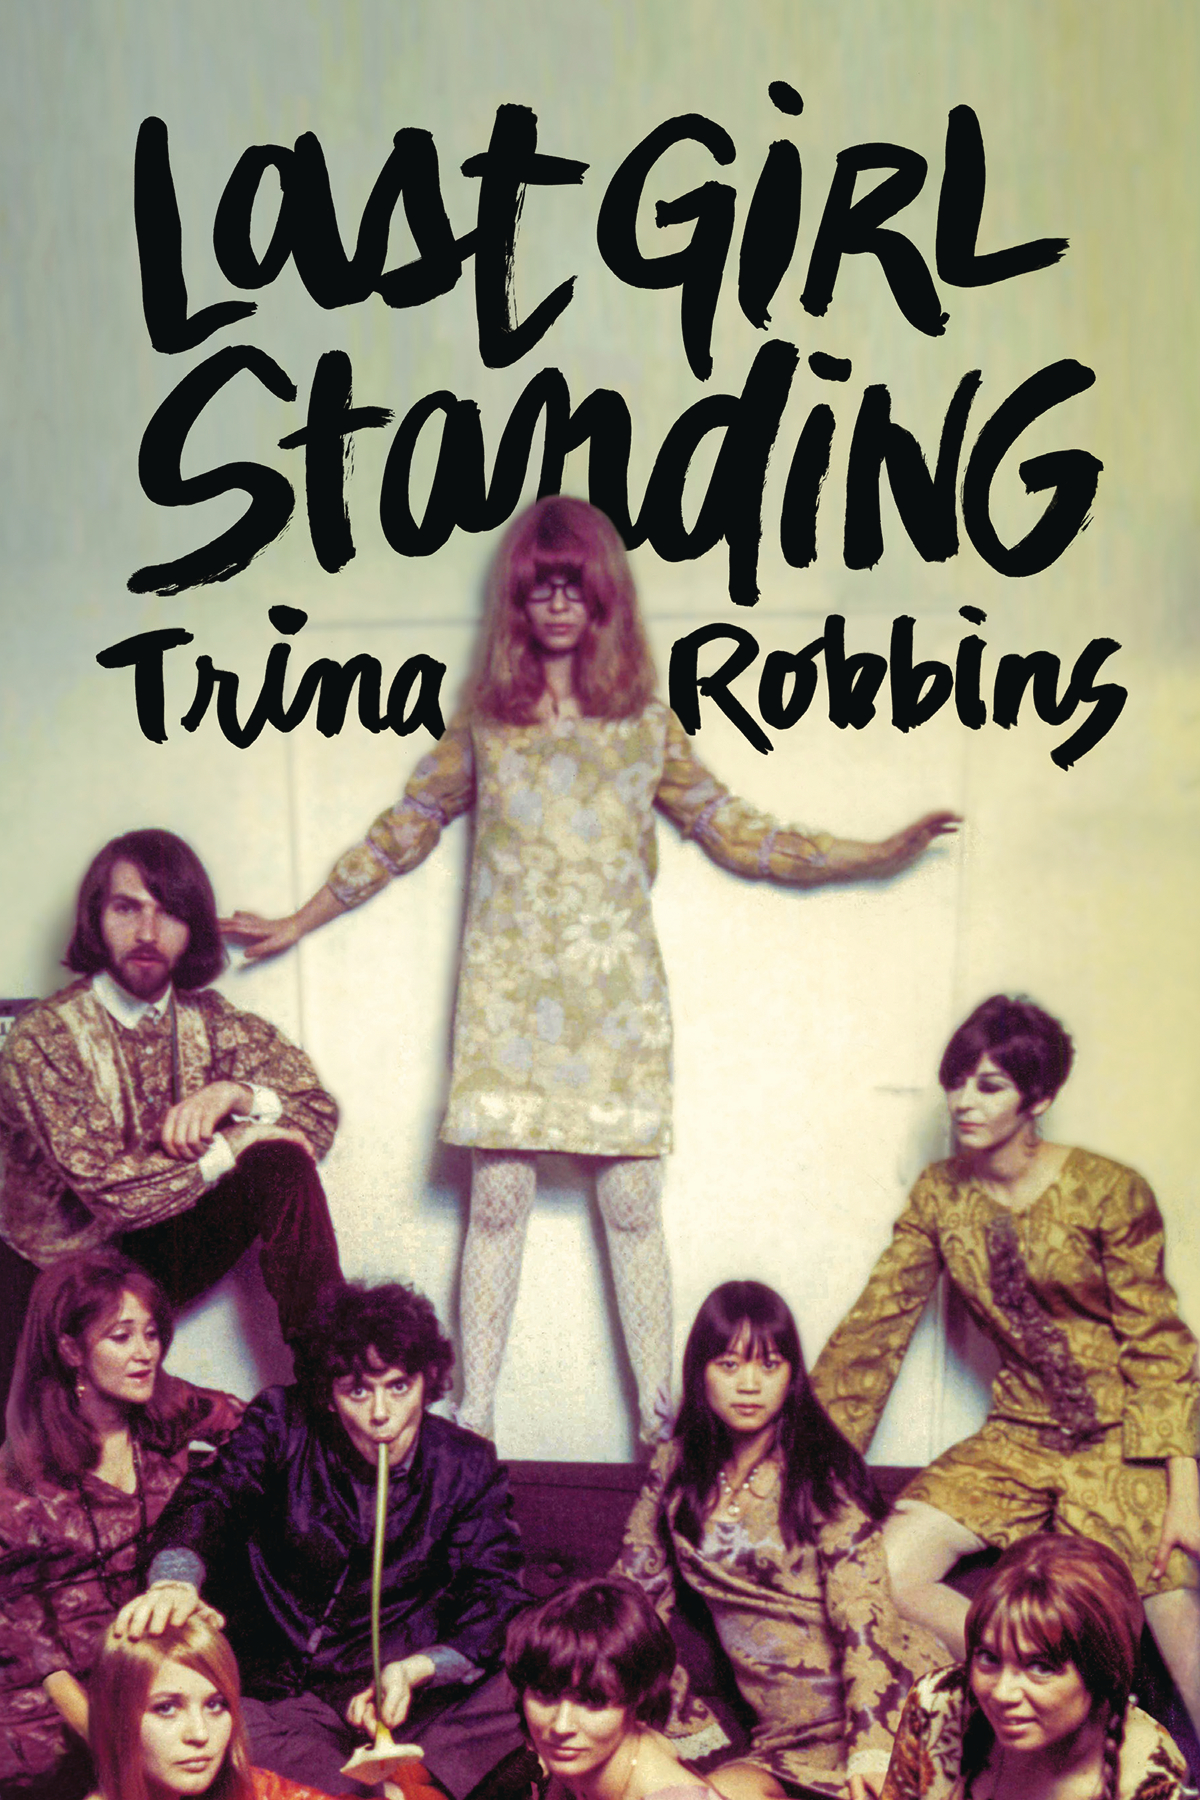 Last Girl Standing Soft Cover Trina Robbins